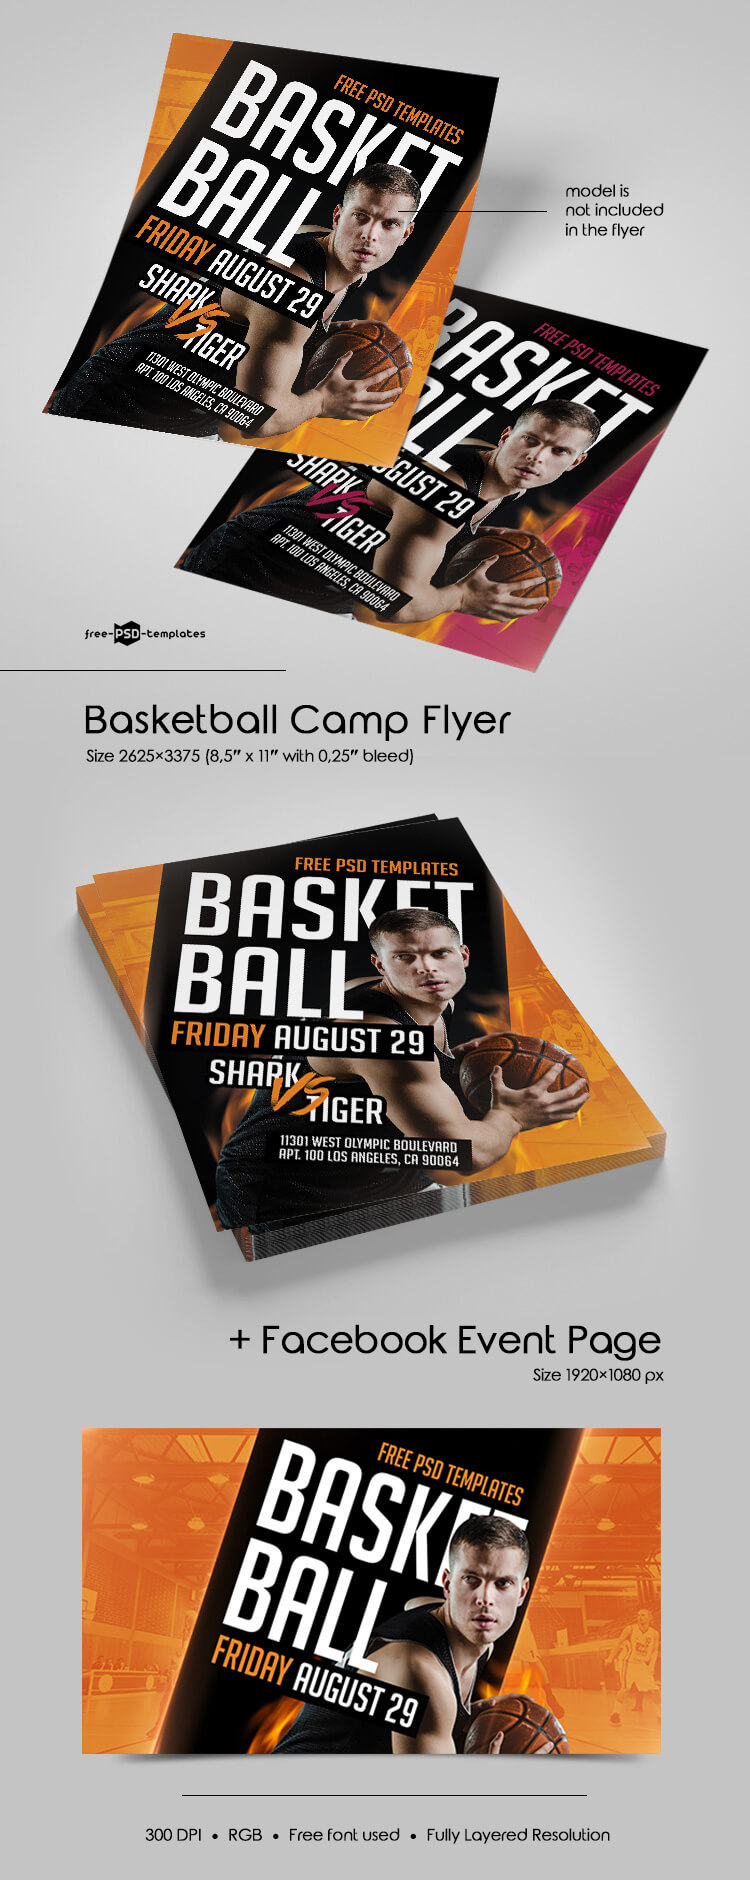 Free Basketball Camp Flyer In Psd | Free Psd Templates With Basketball Camp Brochure Template